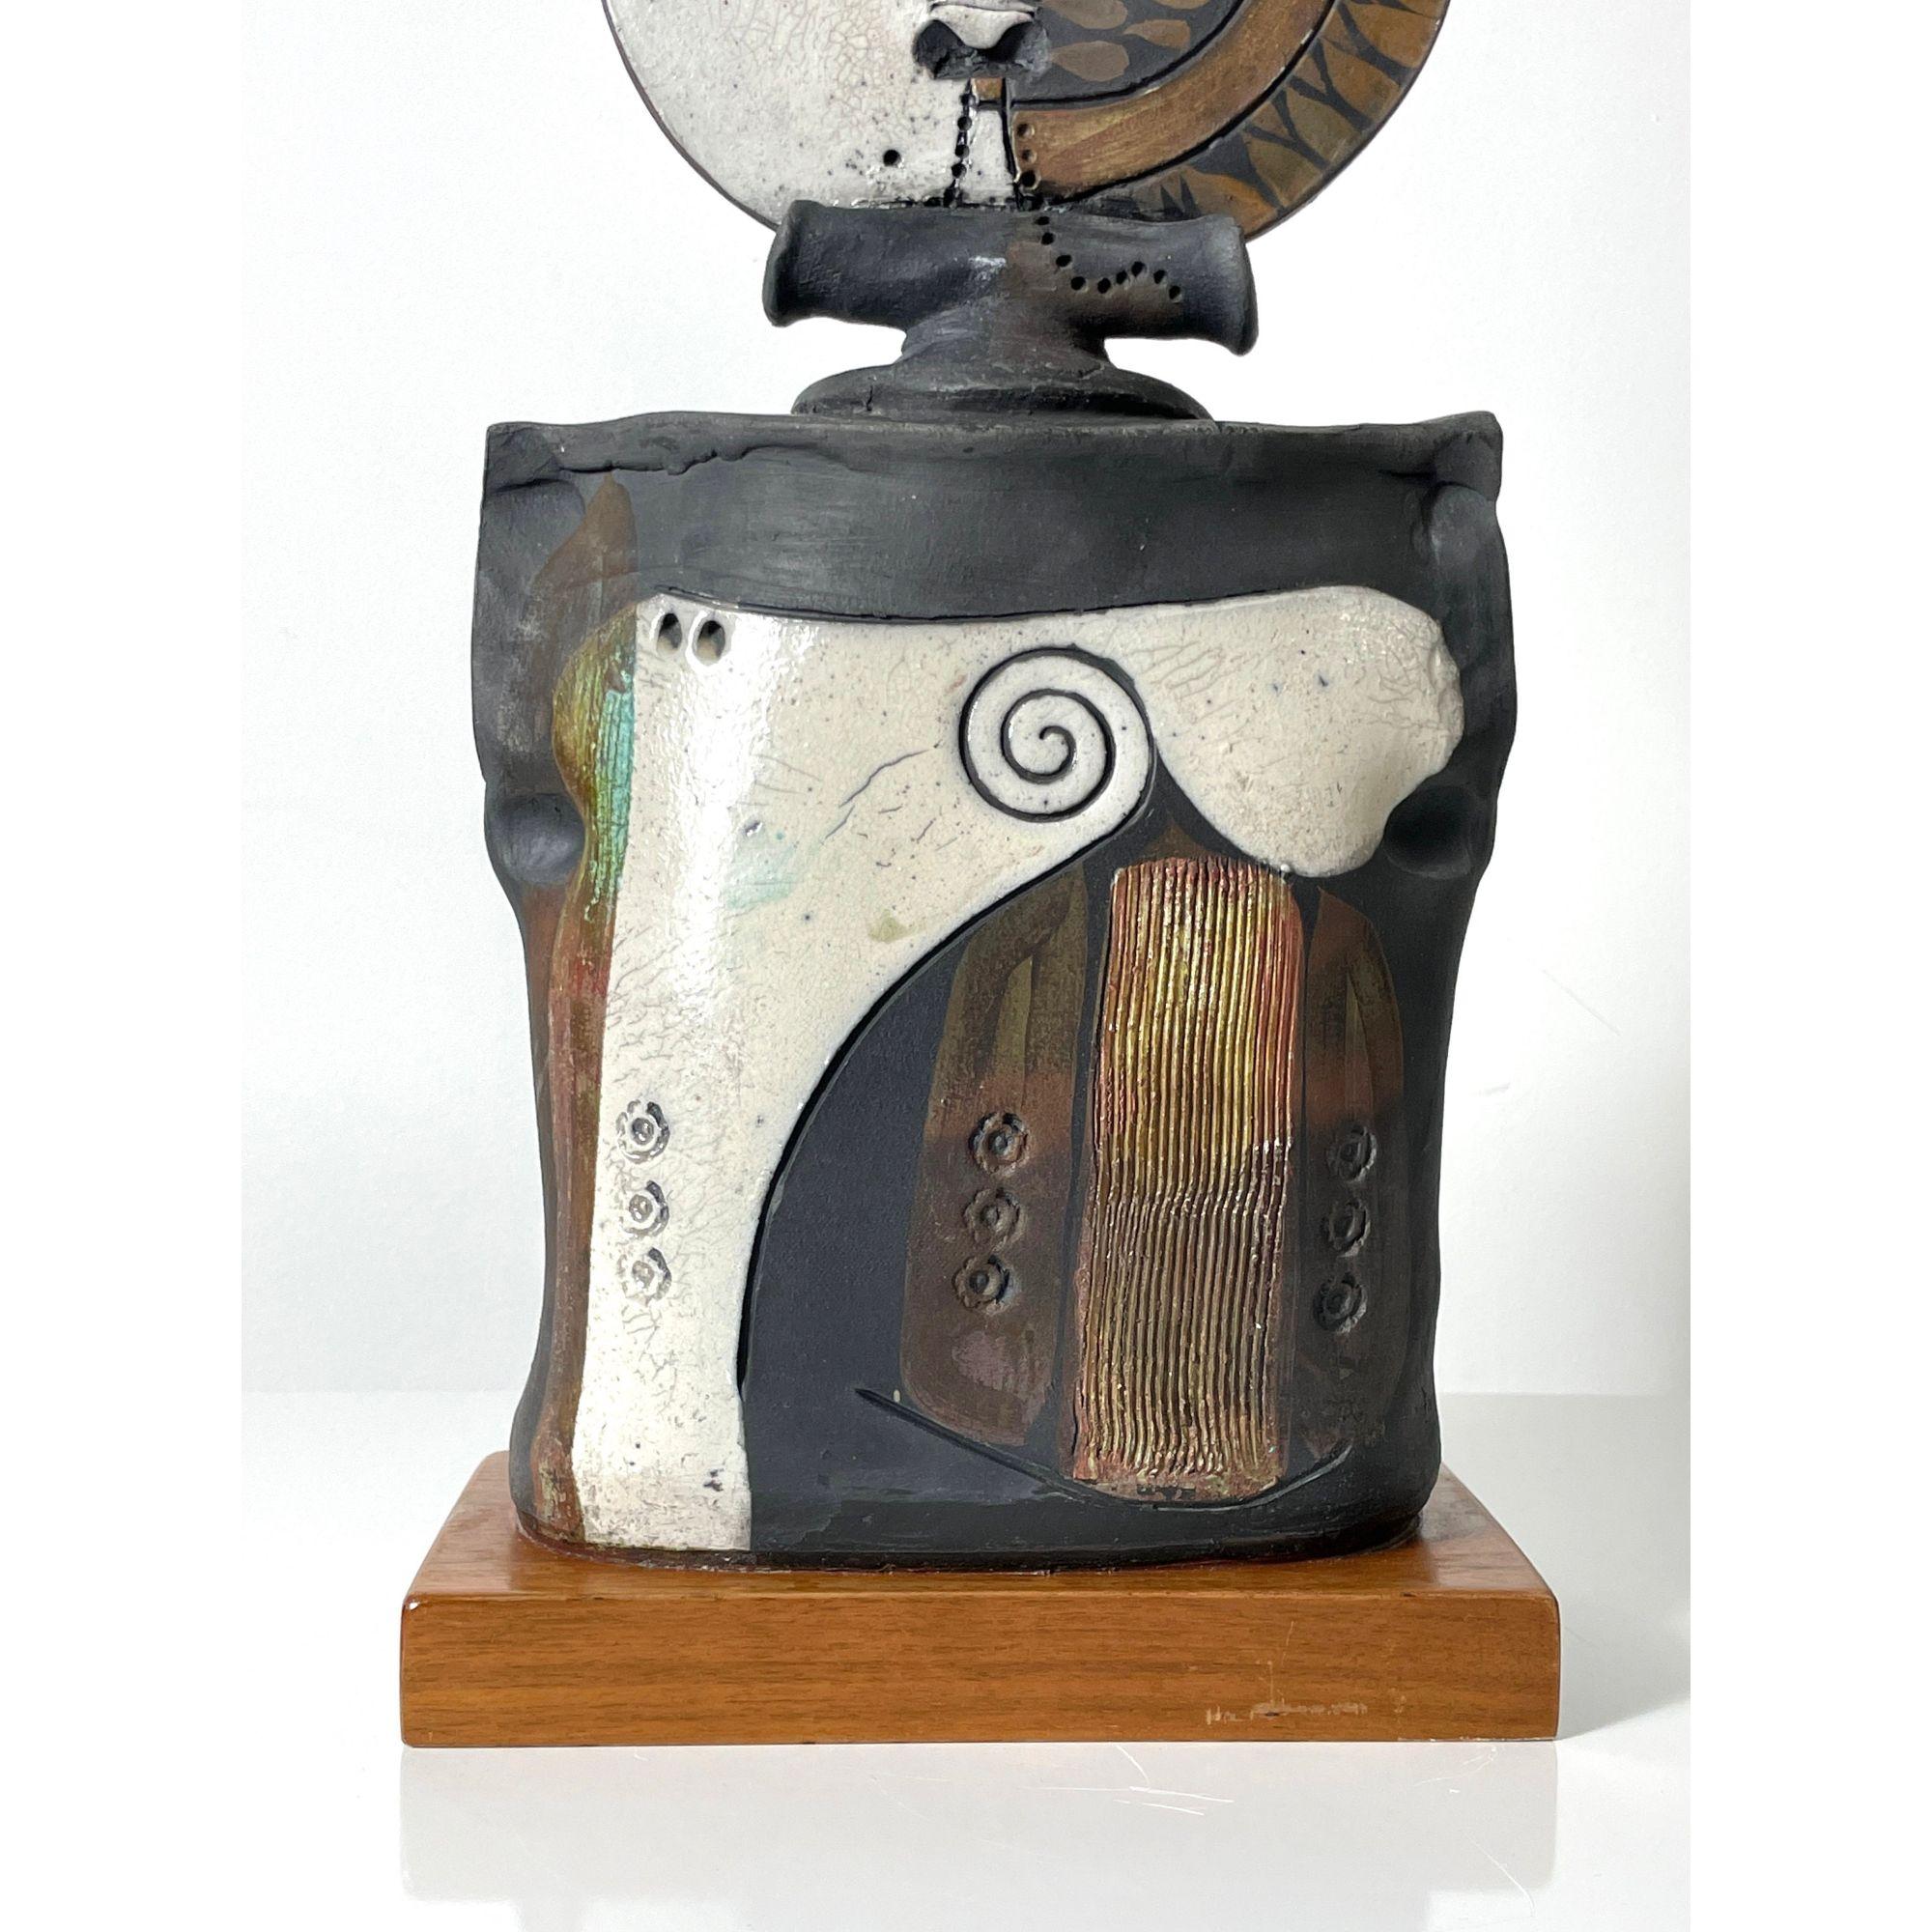 Studio Pottery Abstract Ceramic Cubist Figure Torso Sculpture by Doug DeLind In Good Condition For Sale In Troy, MI